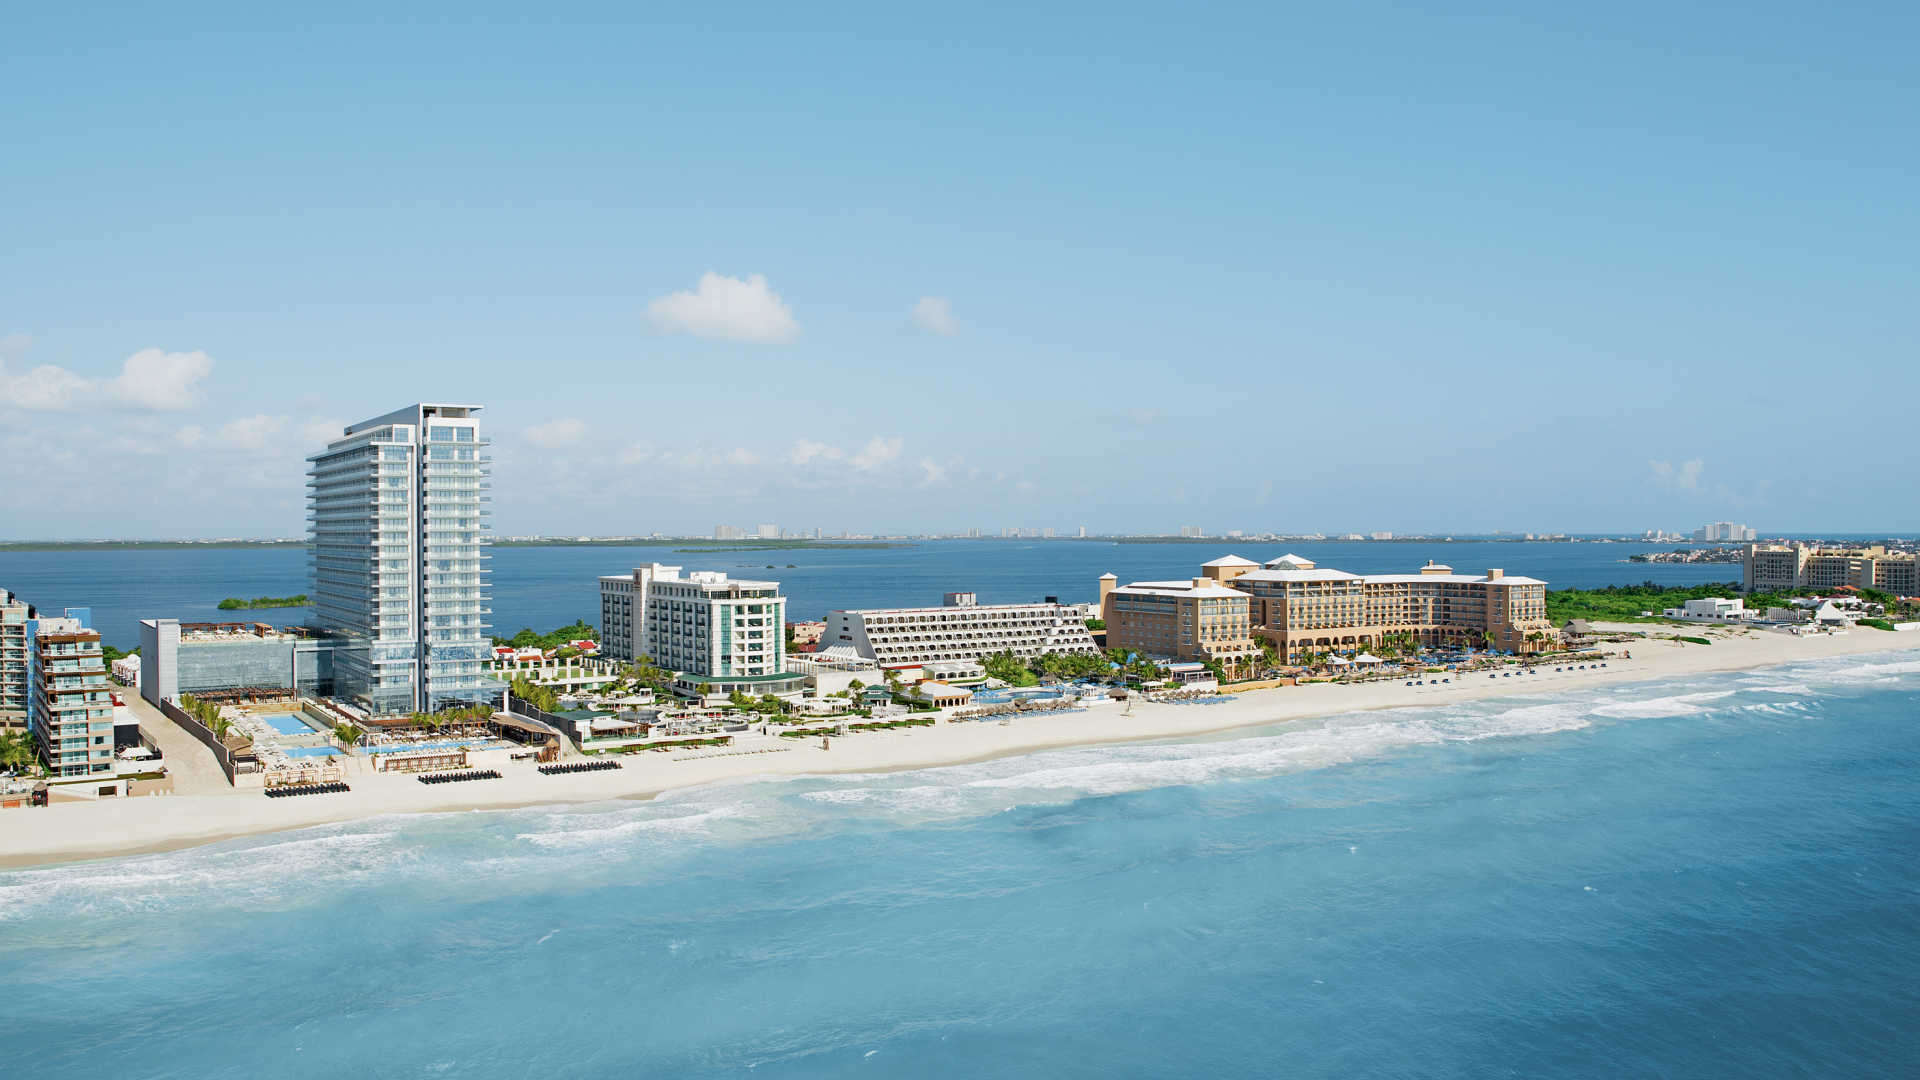   Cancun, Mexico    Find Flights  